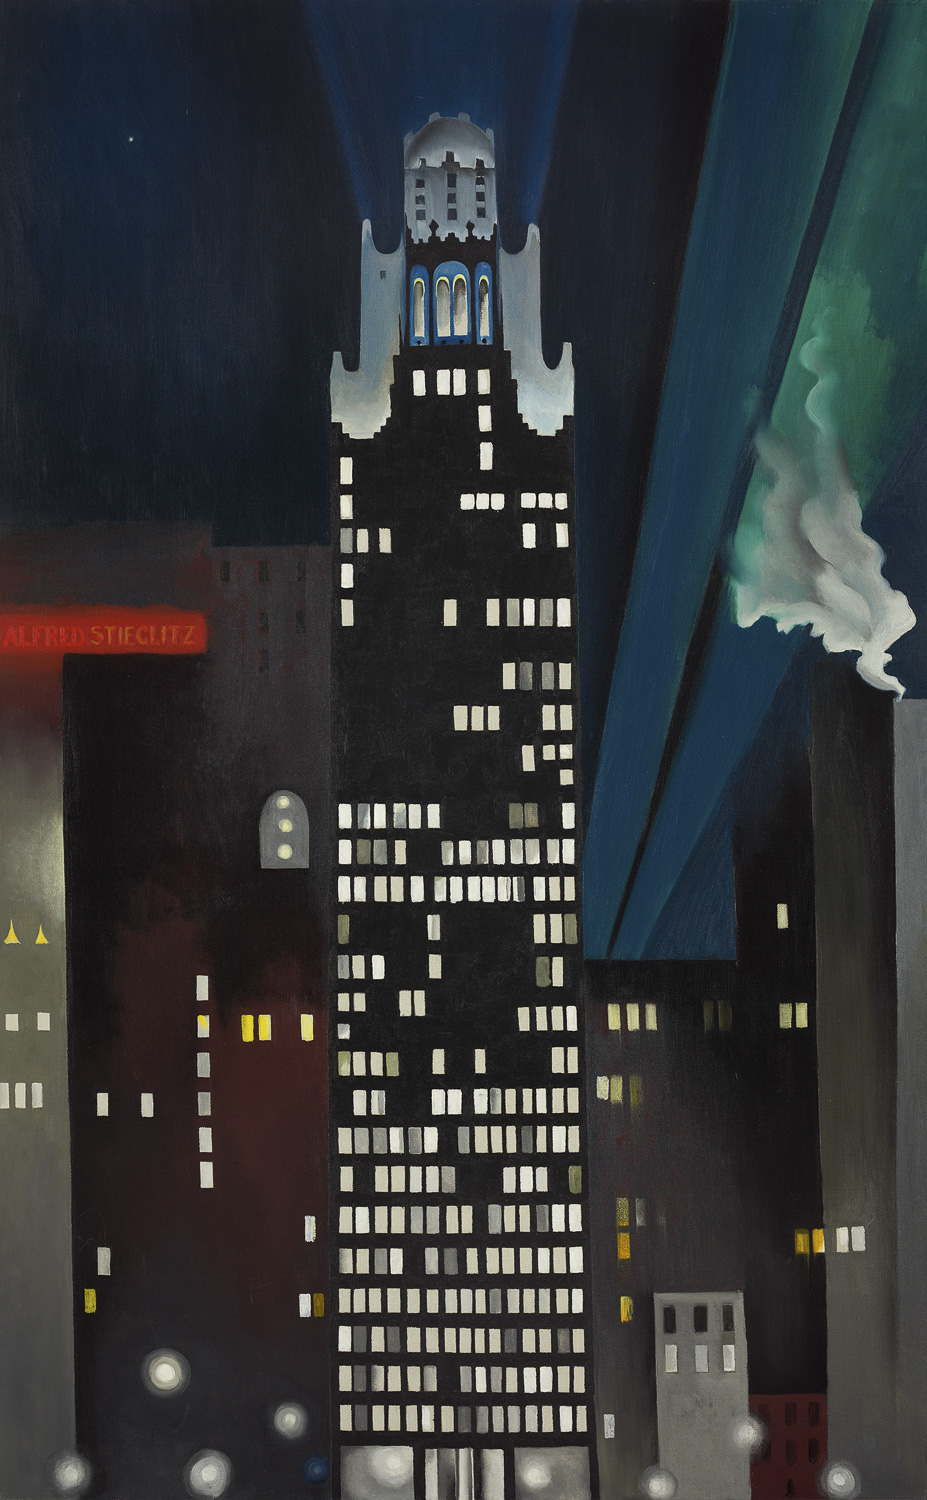 A painting of the American Radiator Building at night, in an abstract style that emphasizes geometric shapes and flat colors. The building is a tall black rectangle punctuated by lit windows. The top of the building is a stylized crown-like structure silhouetted against a larger white structure of similar shape illuminated by bright white lights. Beams of light break the dark blue sky. A plume of smoke rises from a rooftop on the right, turning green as it intersects a light beam. A red neon light advertisement on the left spells out the name Stieglitz.